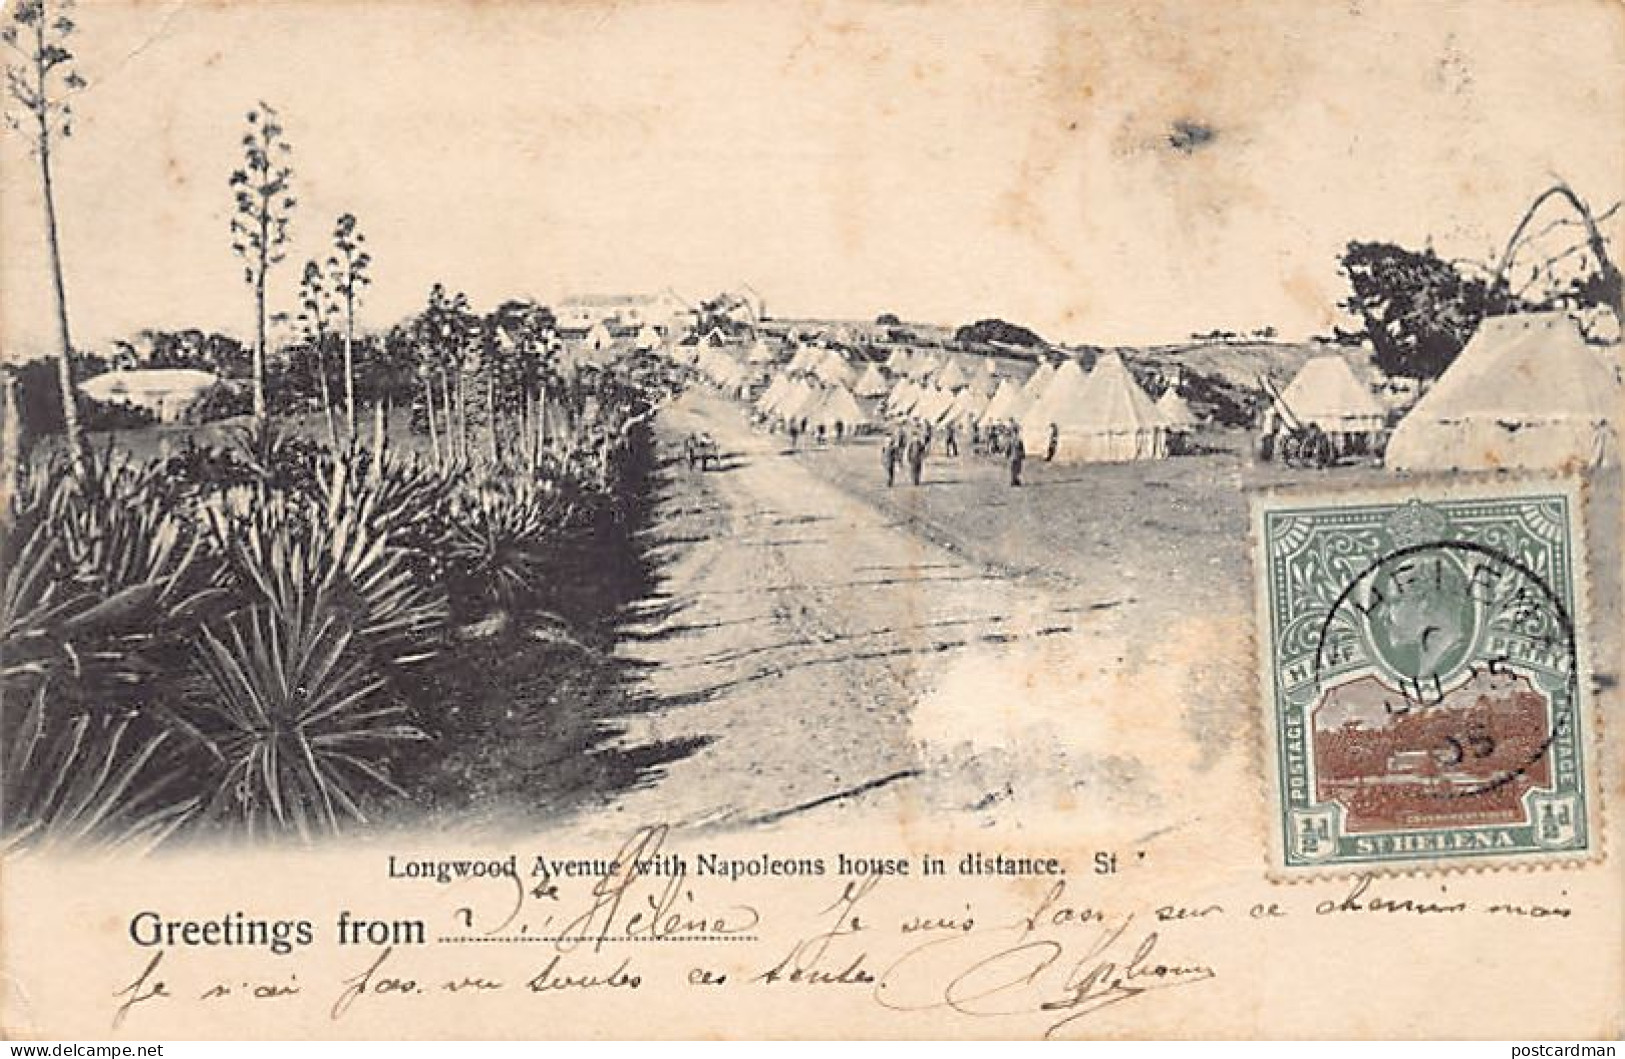 ST. HELENA - Longwood Avenue With Napoleon's House In Distance - Tent Camp, Possibly Interned Boer Prisoners - SEE SCANS - Santa Helena